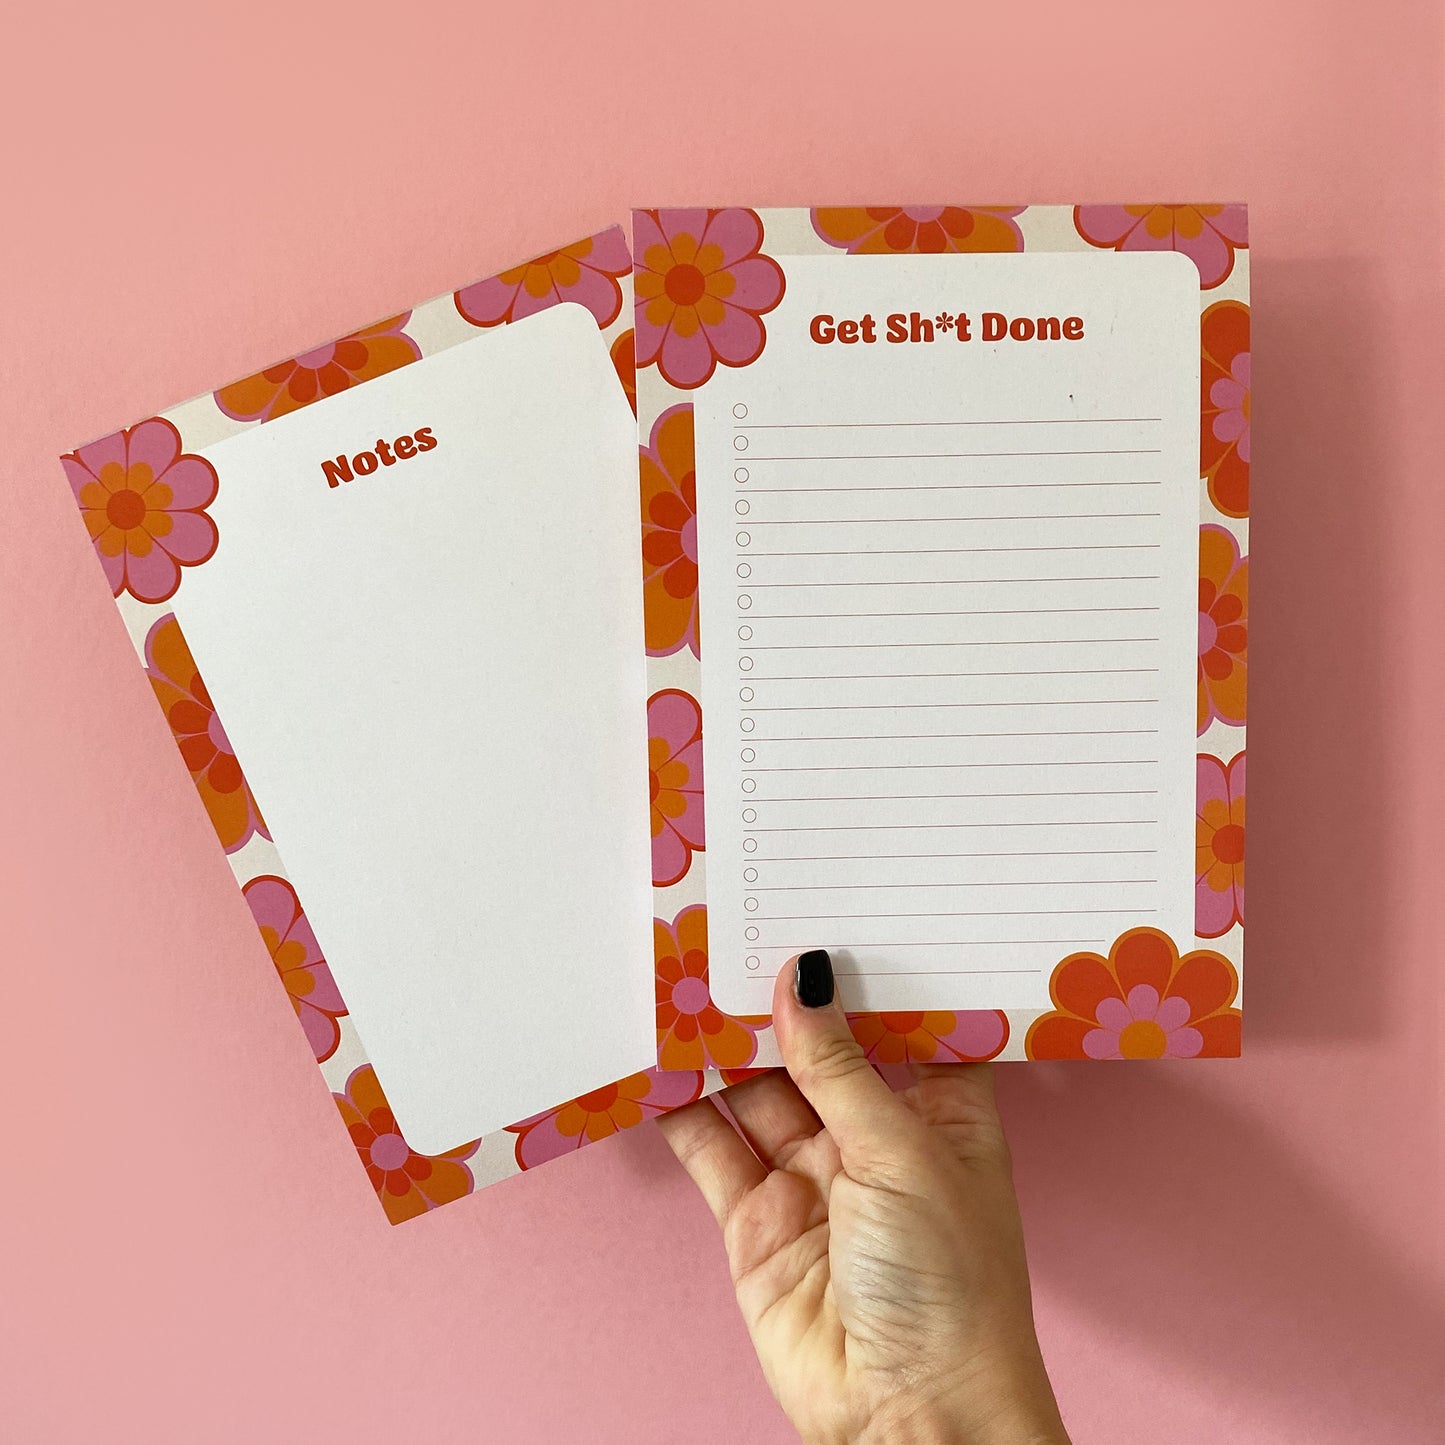 A5 FLORAL 'GET SH*T DONE' NOTEPAD